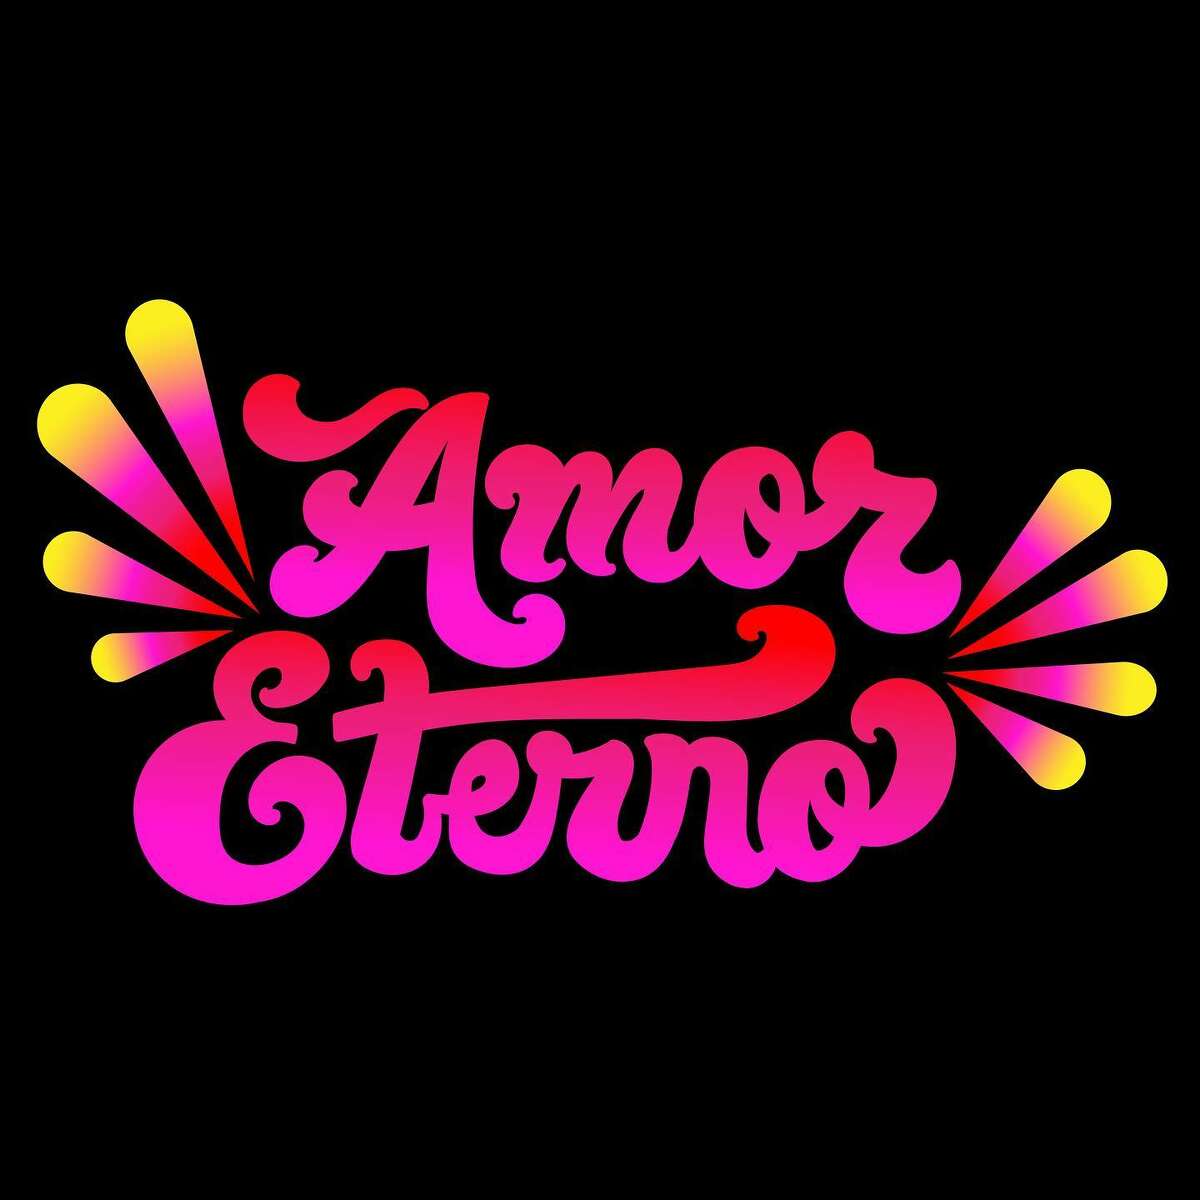 Amor Eterno, an intimate bar by the minds of Brian Correa and Aaron Peña, is preparing for an October opening at 540 S. Presa St. Correa is the owner of the venerable Bar America and Pena's is The Squeezebox, a St. Mary's Strip hot spot. The two have been collaborating on the new concept since before the coronavirus pandemic took a hold in San Antonio.